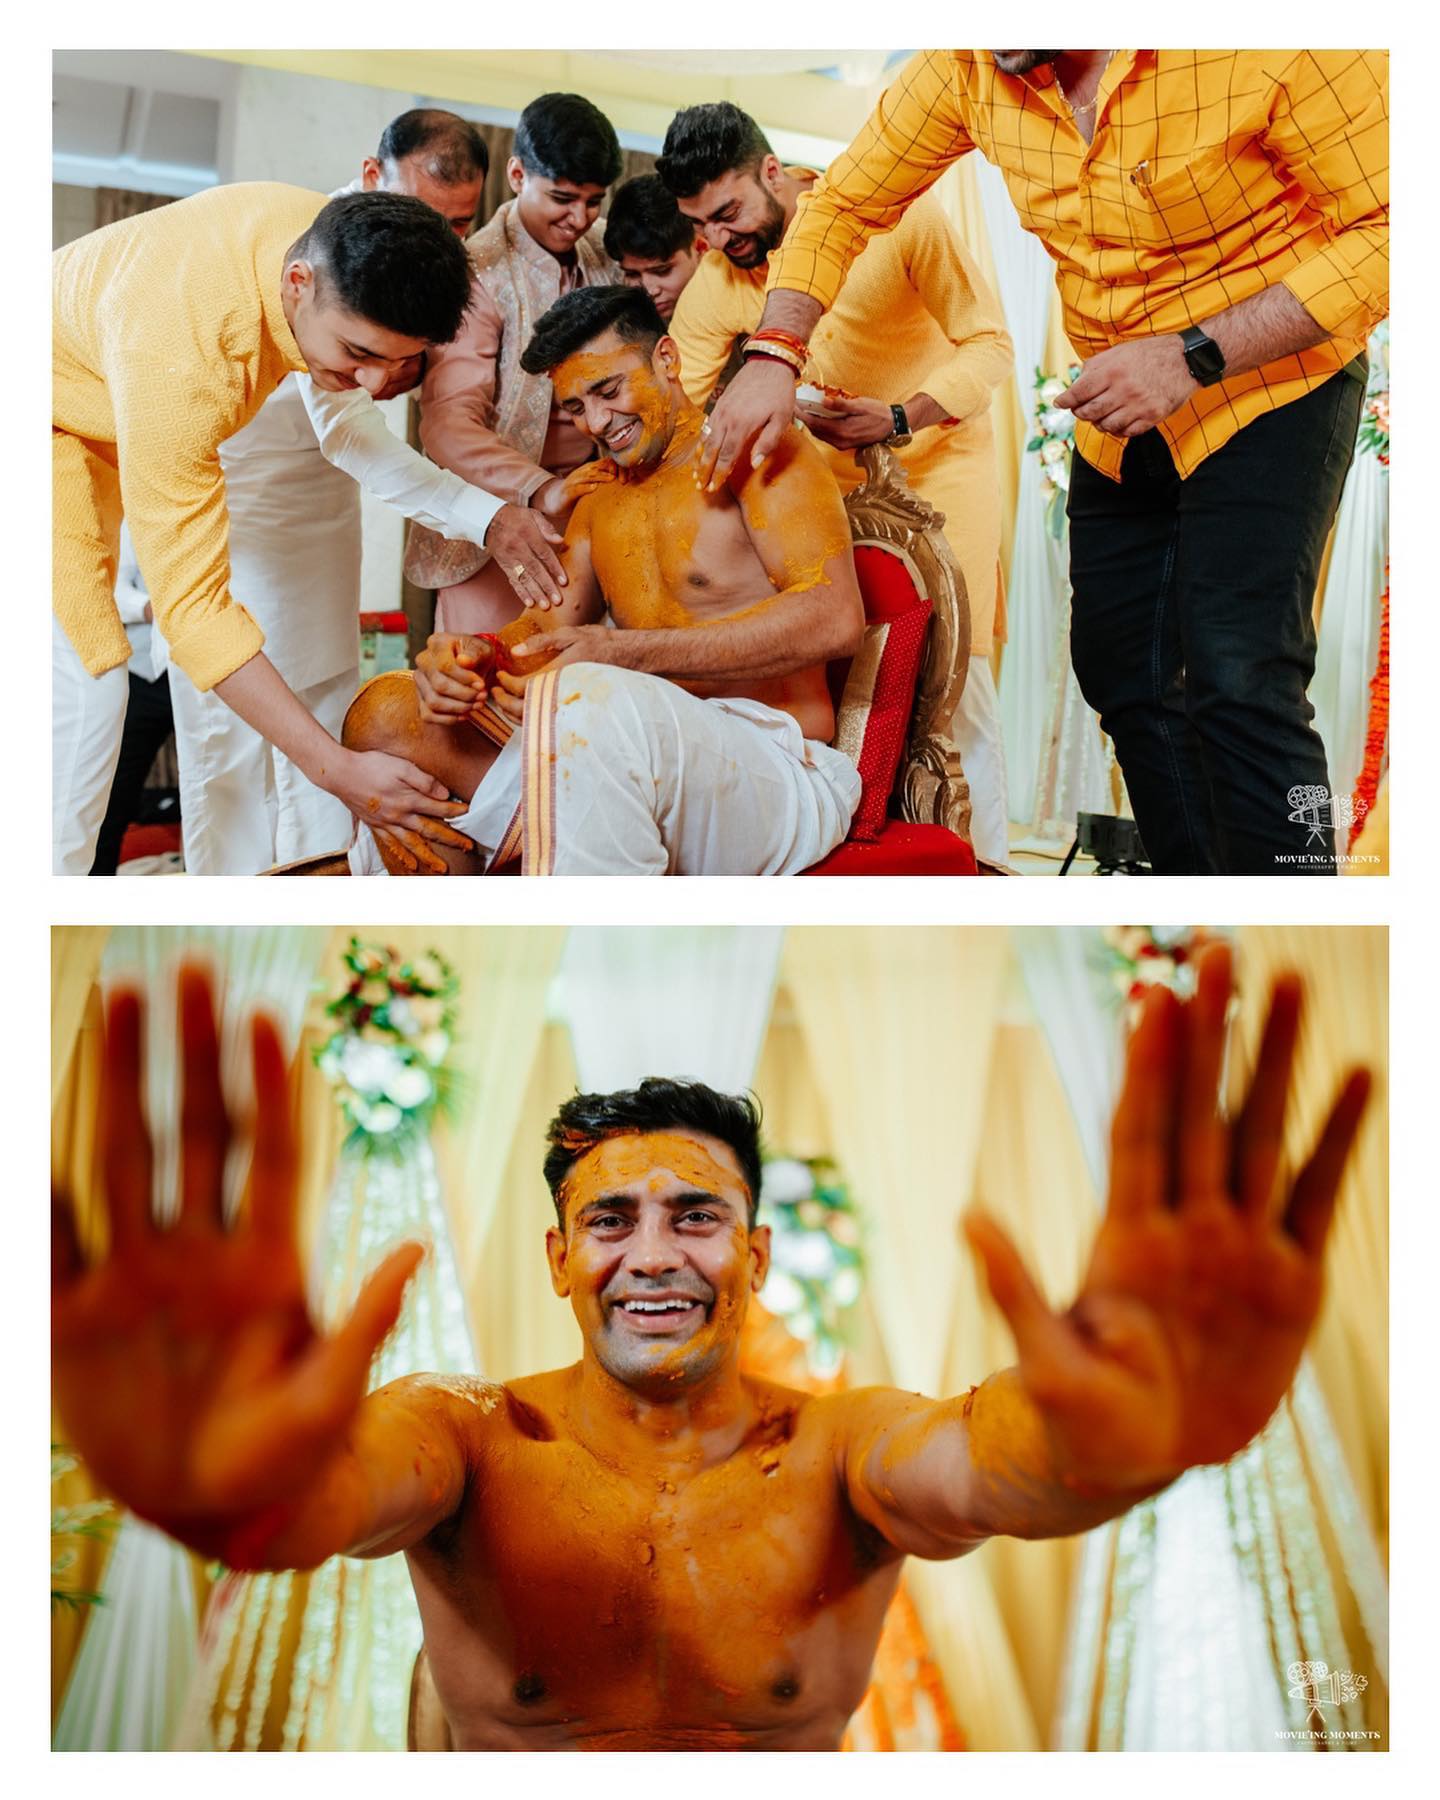 Payal Rohatgi And Sangram Singh Tie The Knot In An Intimate Wedding!